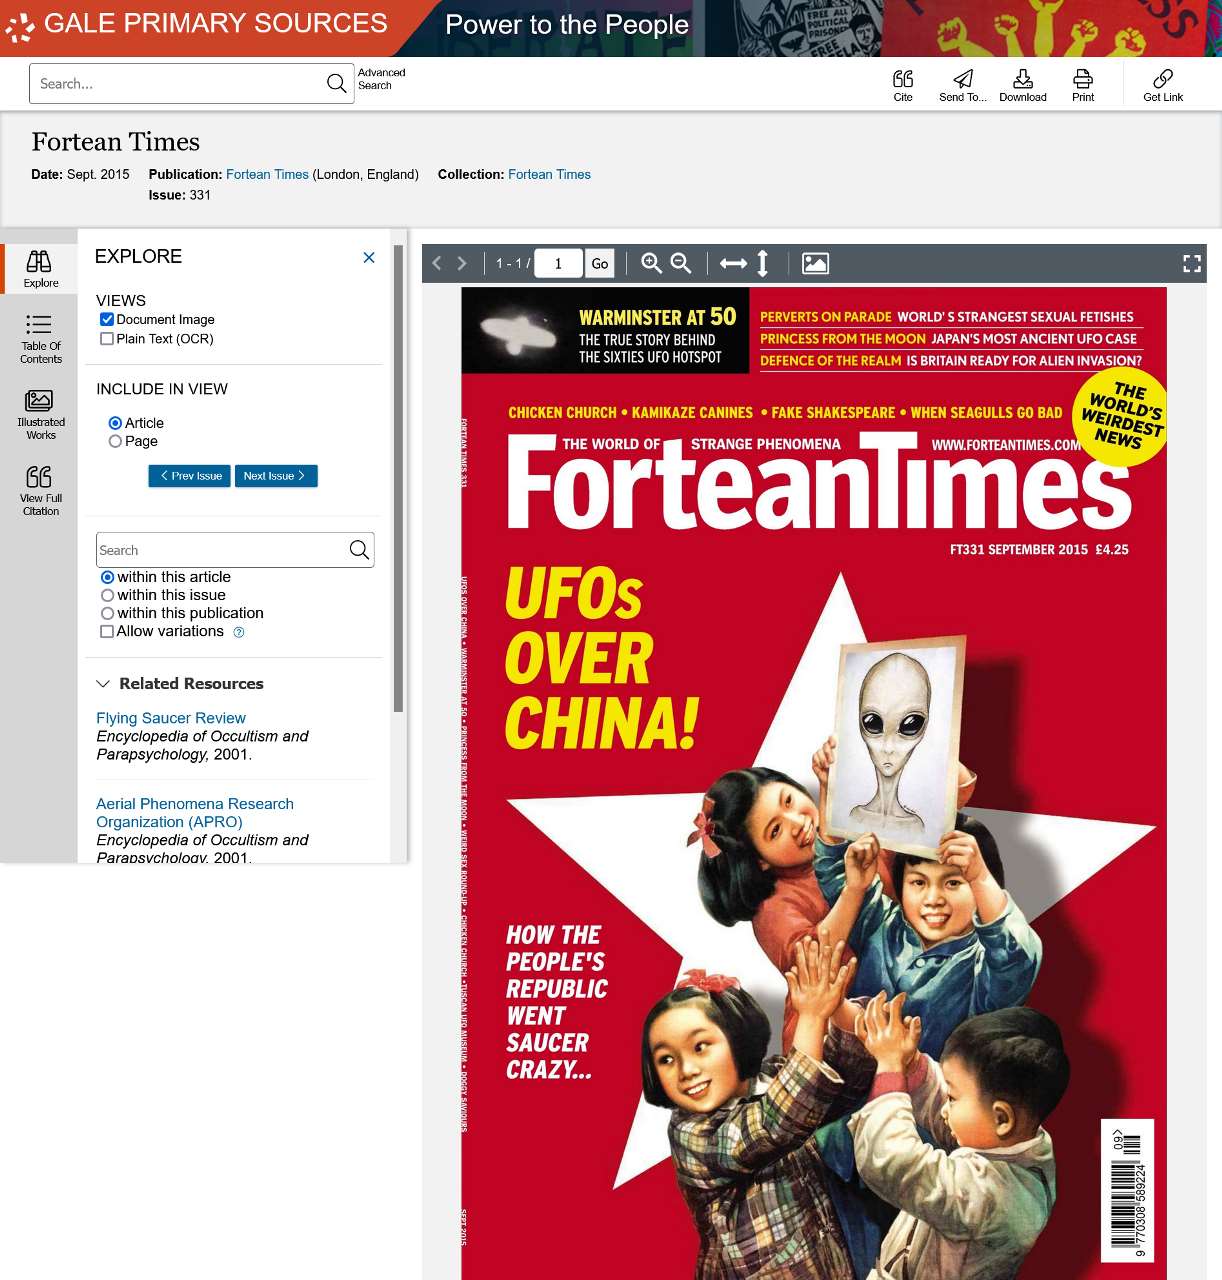 Power to the People: Counterculture, Social Movements, and the Alternative Press, Nineteenth to Twenty-first Centuryの収録文献の例（『Fortean Times』より）